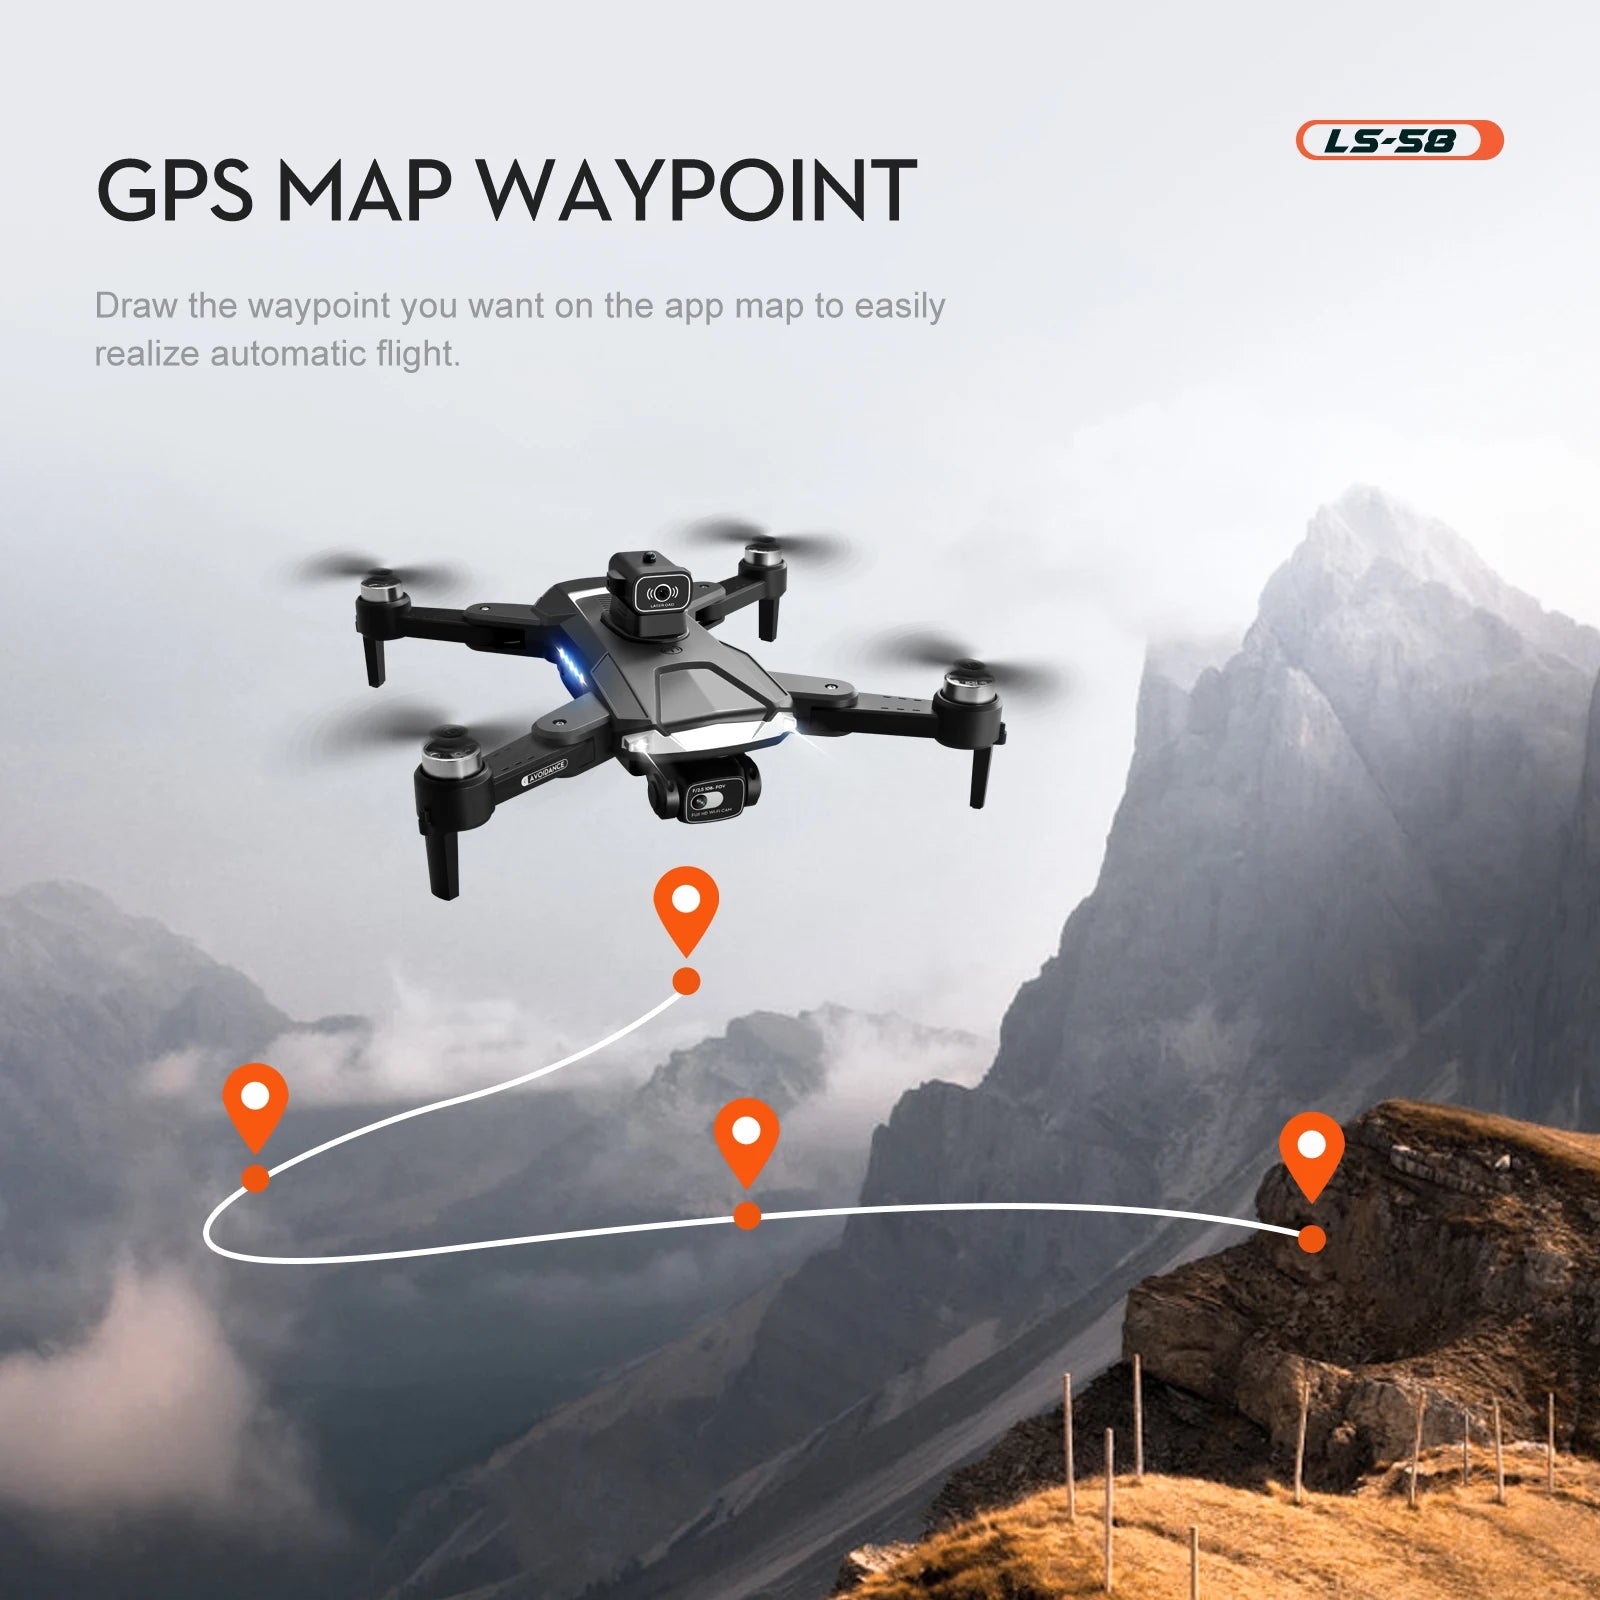 LS58 Drone, draw the waypoint you want on the app map to easily realize automatic